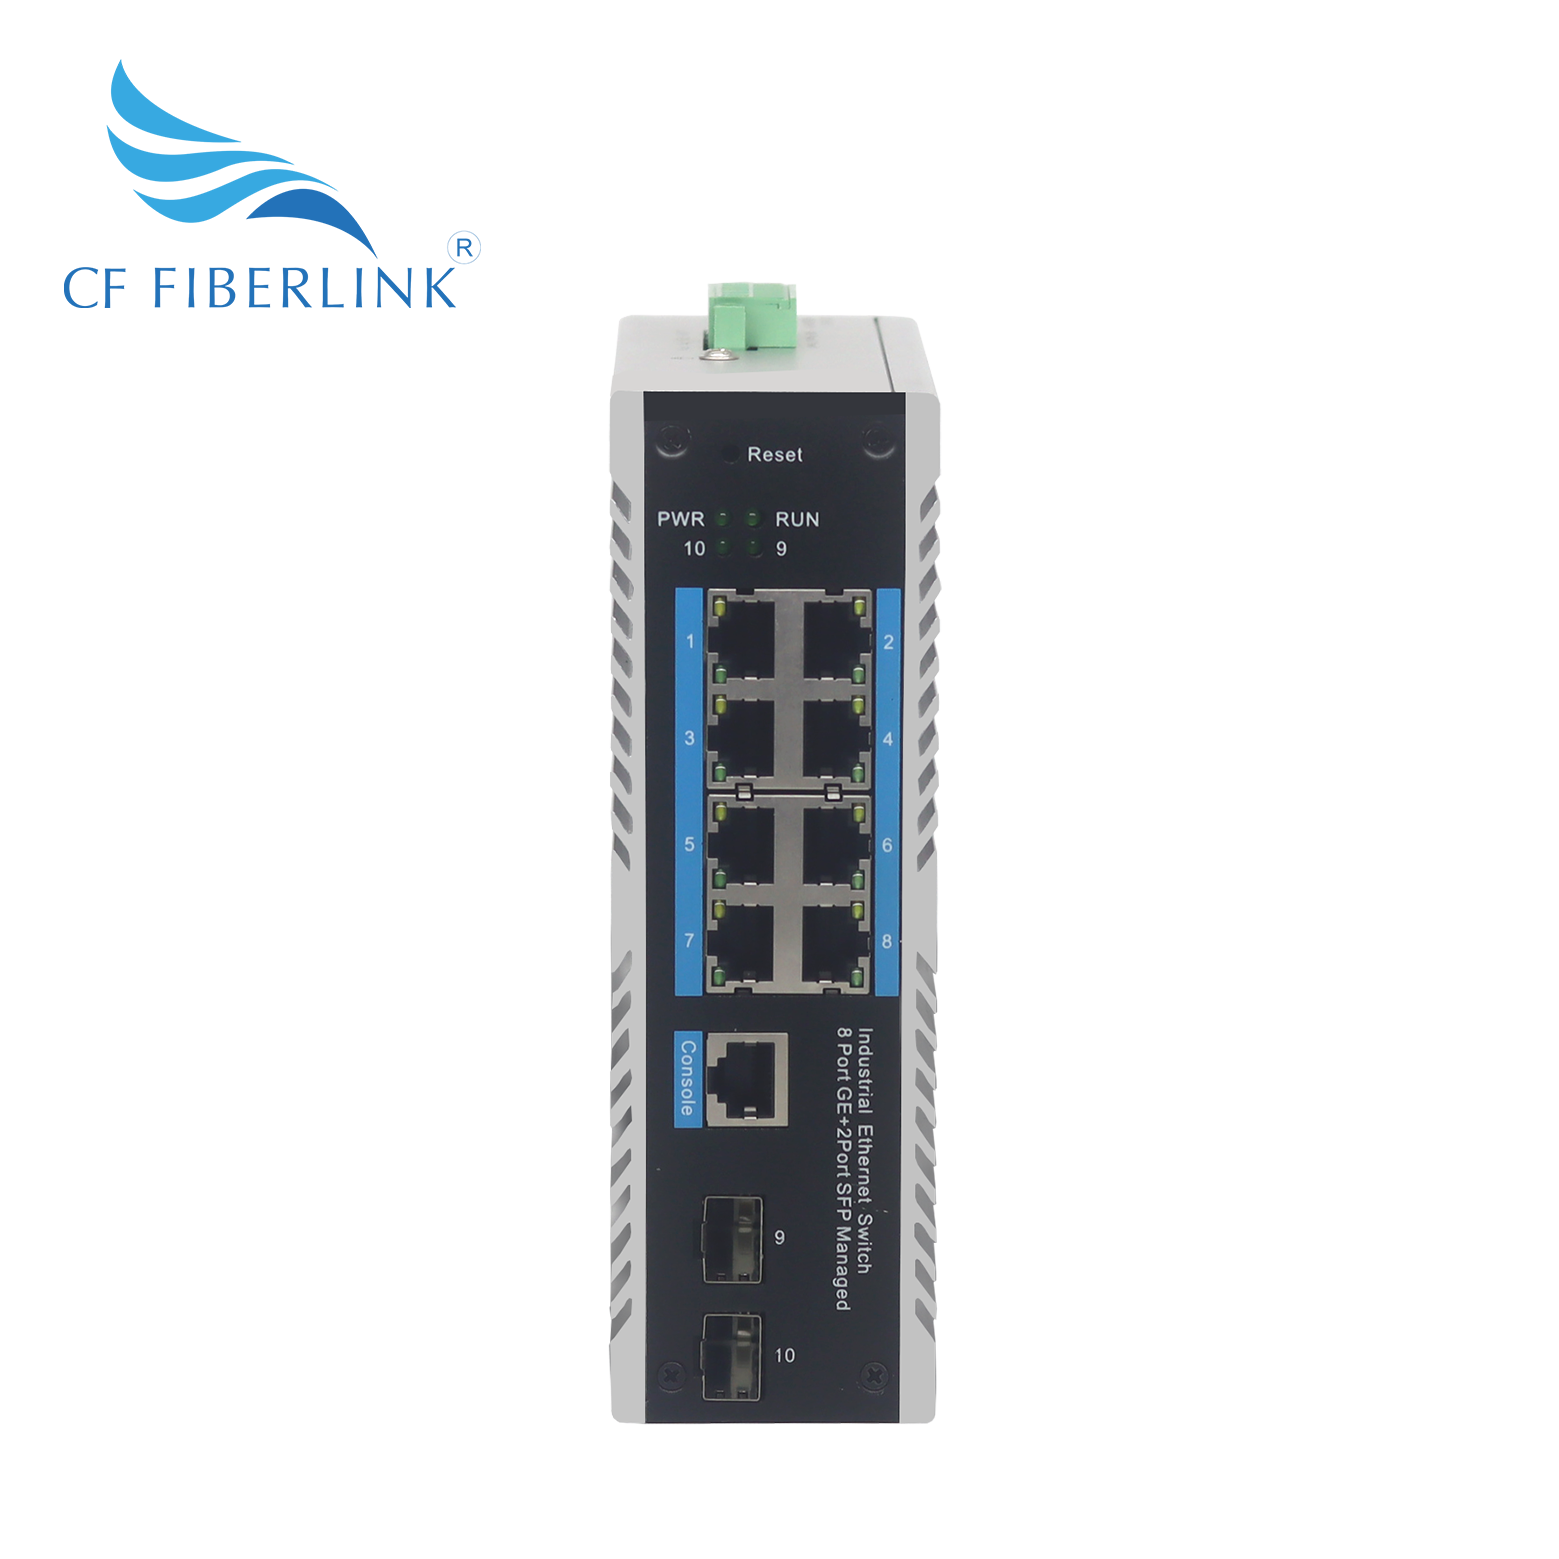 NETGEAR Announces New PoE+ and PoE++ Ethernet Switches - StorageReview.com